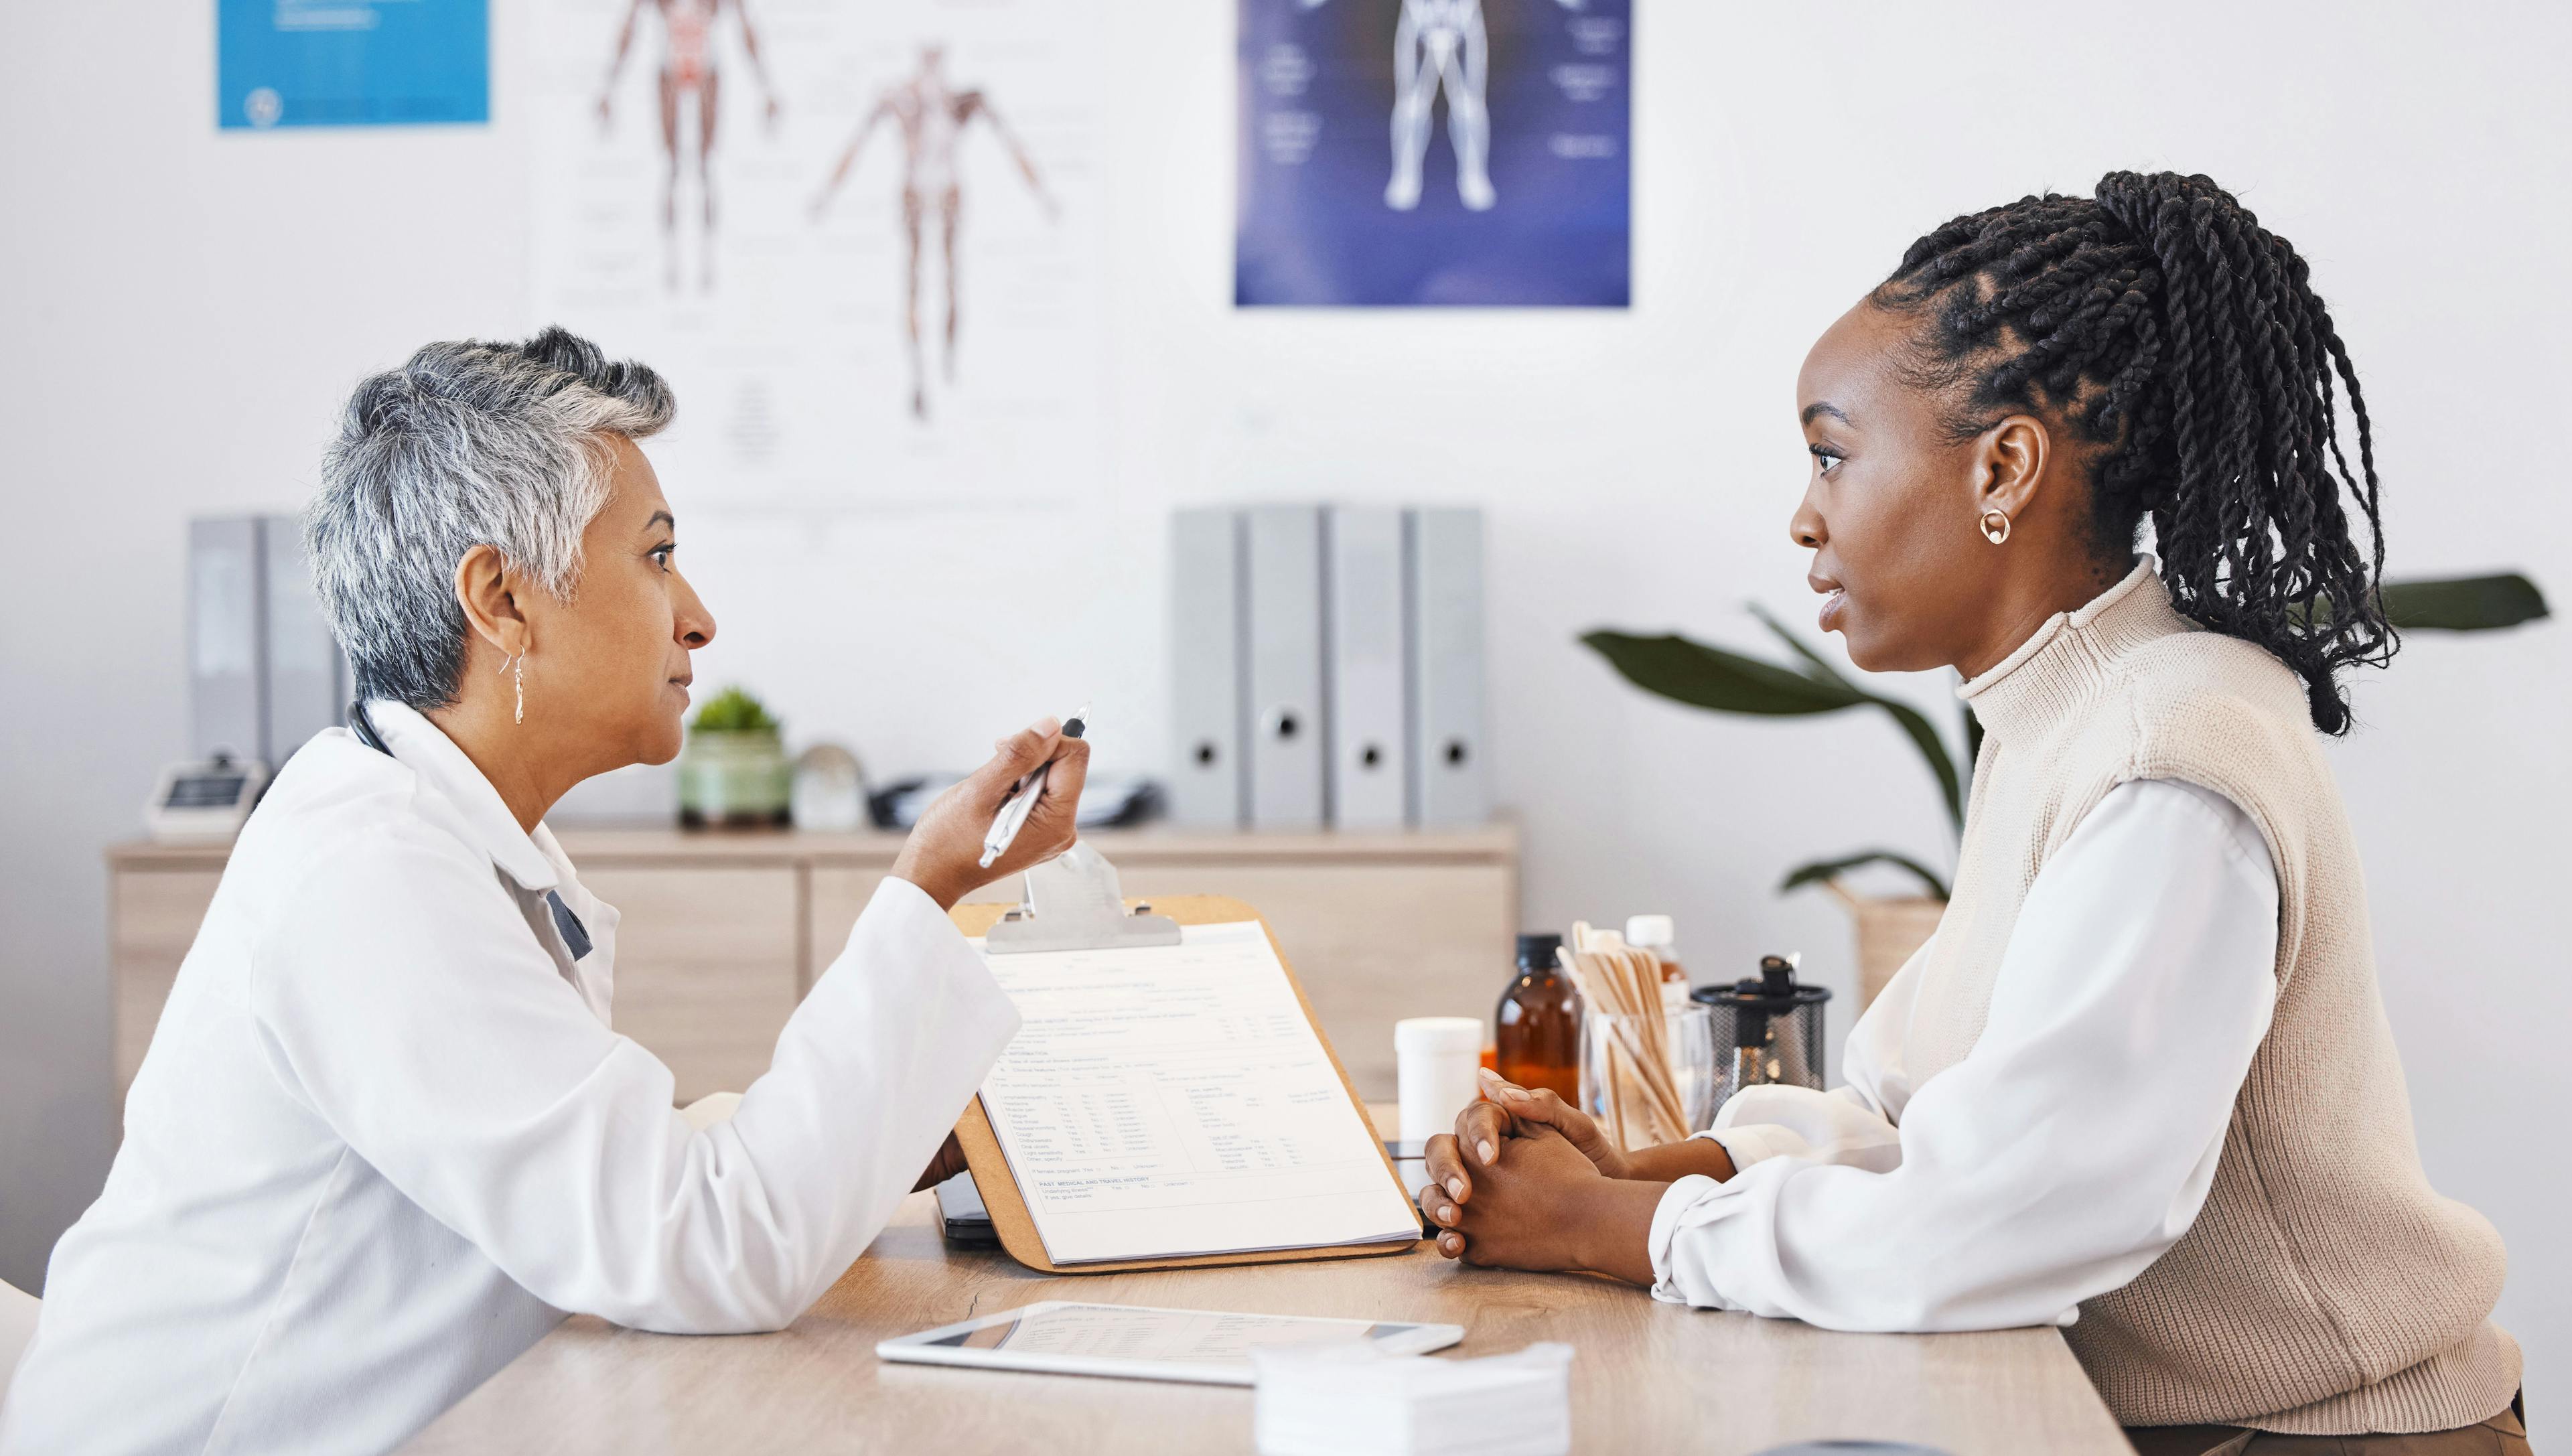 Racial Discrimination in Cancer Care Setting Impacts Black Patients Long-Term